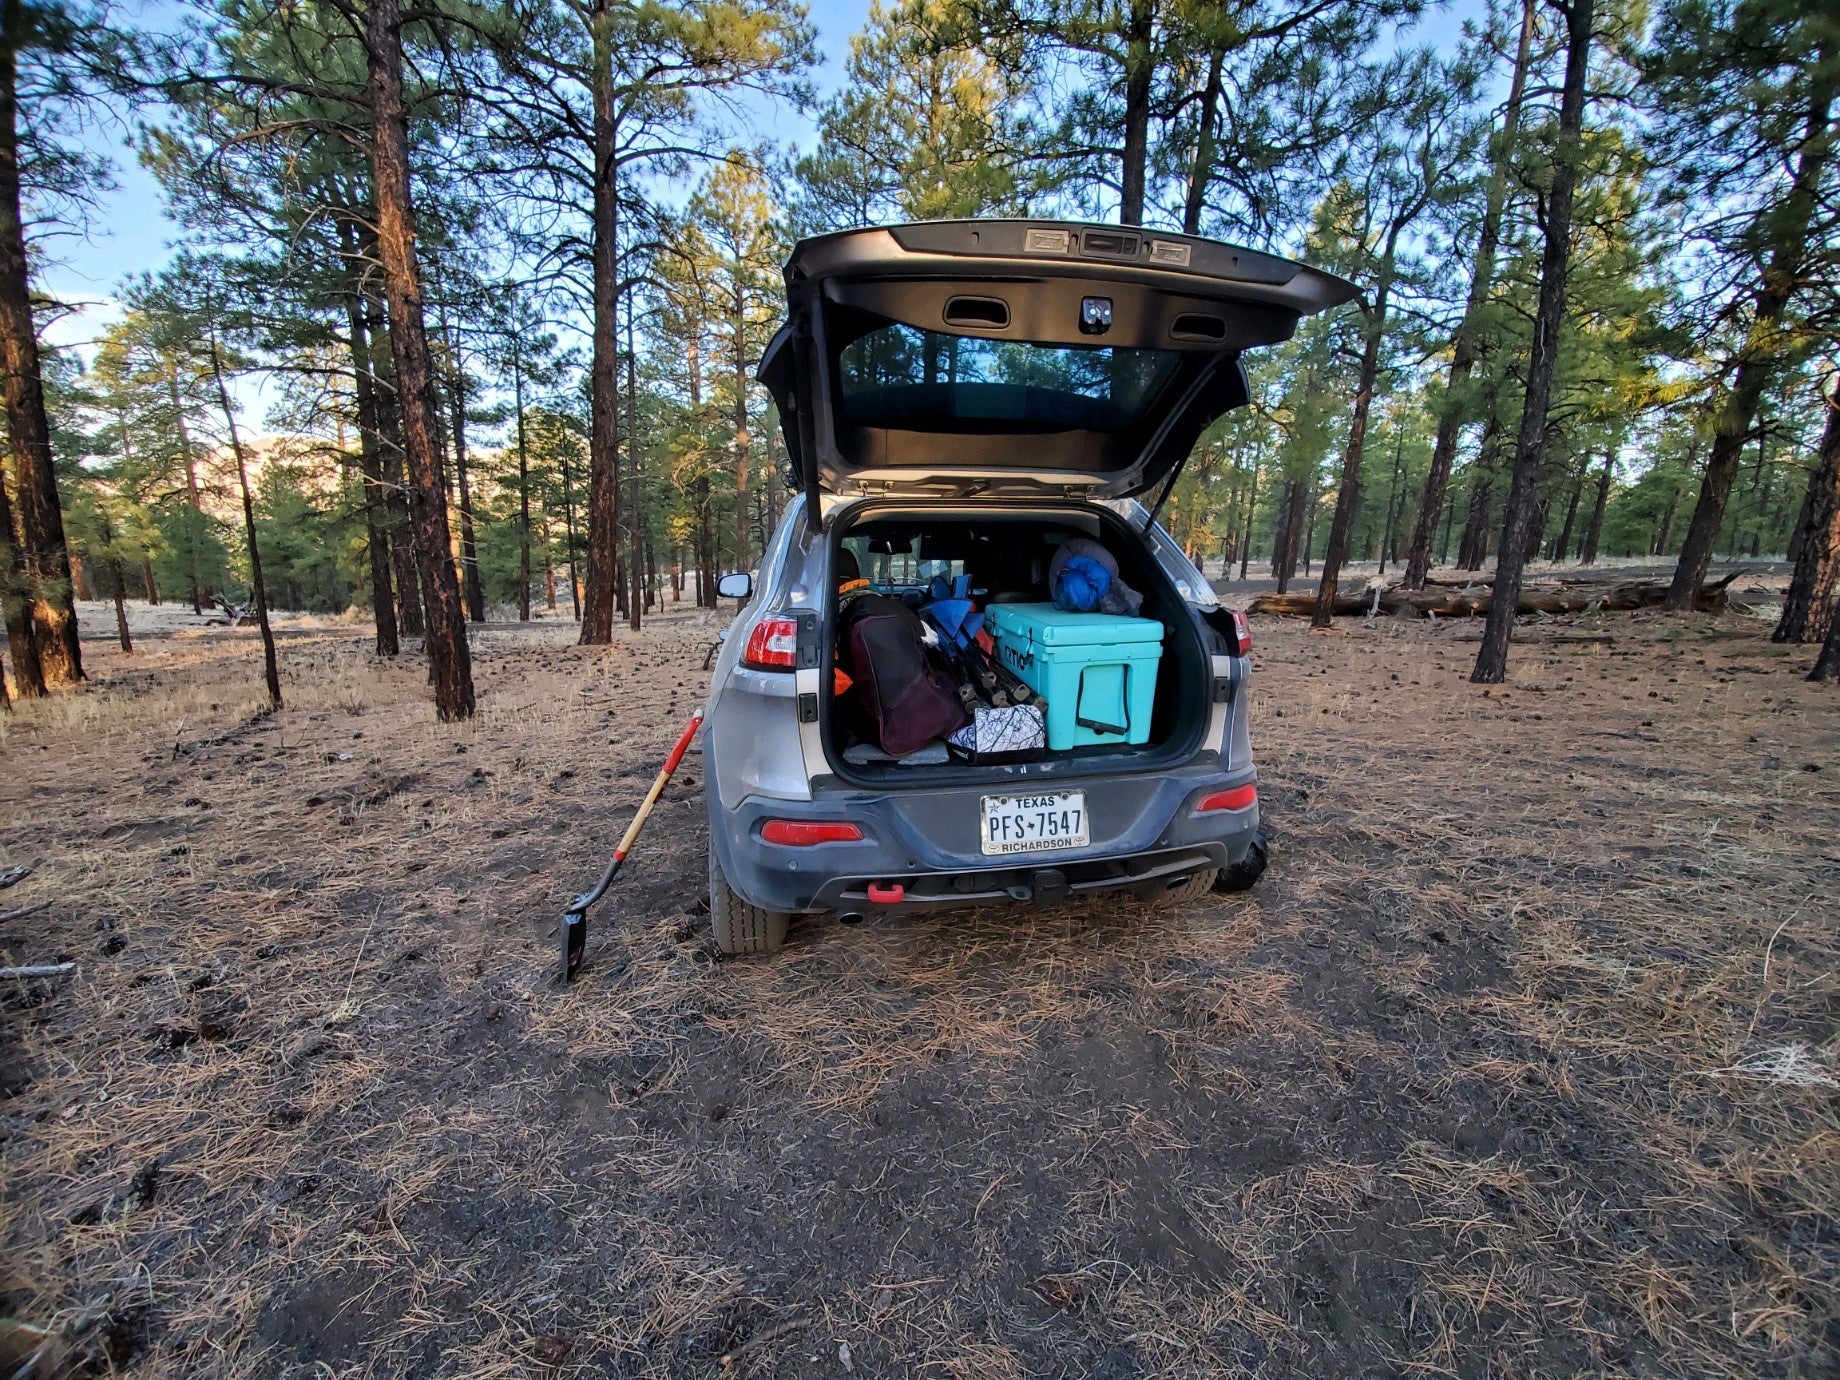 Camper submitted image from Dispersed Camping around Sunset Crater Volcano NM - 3